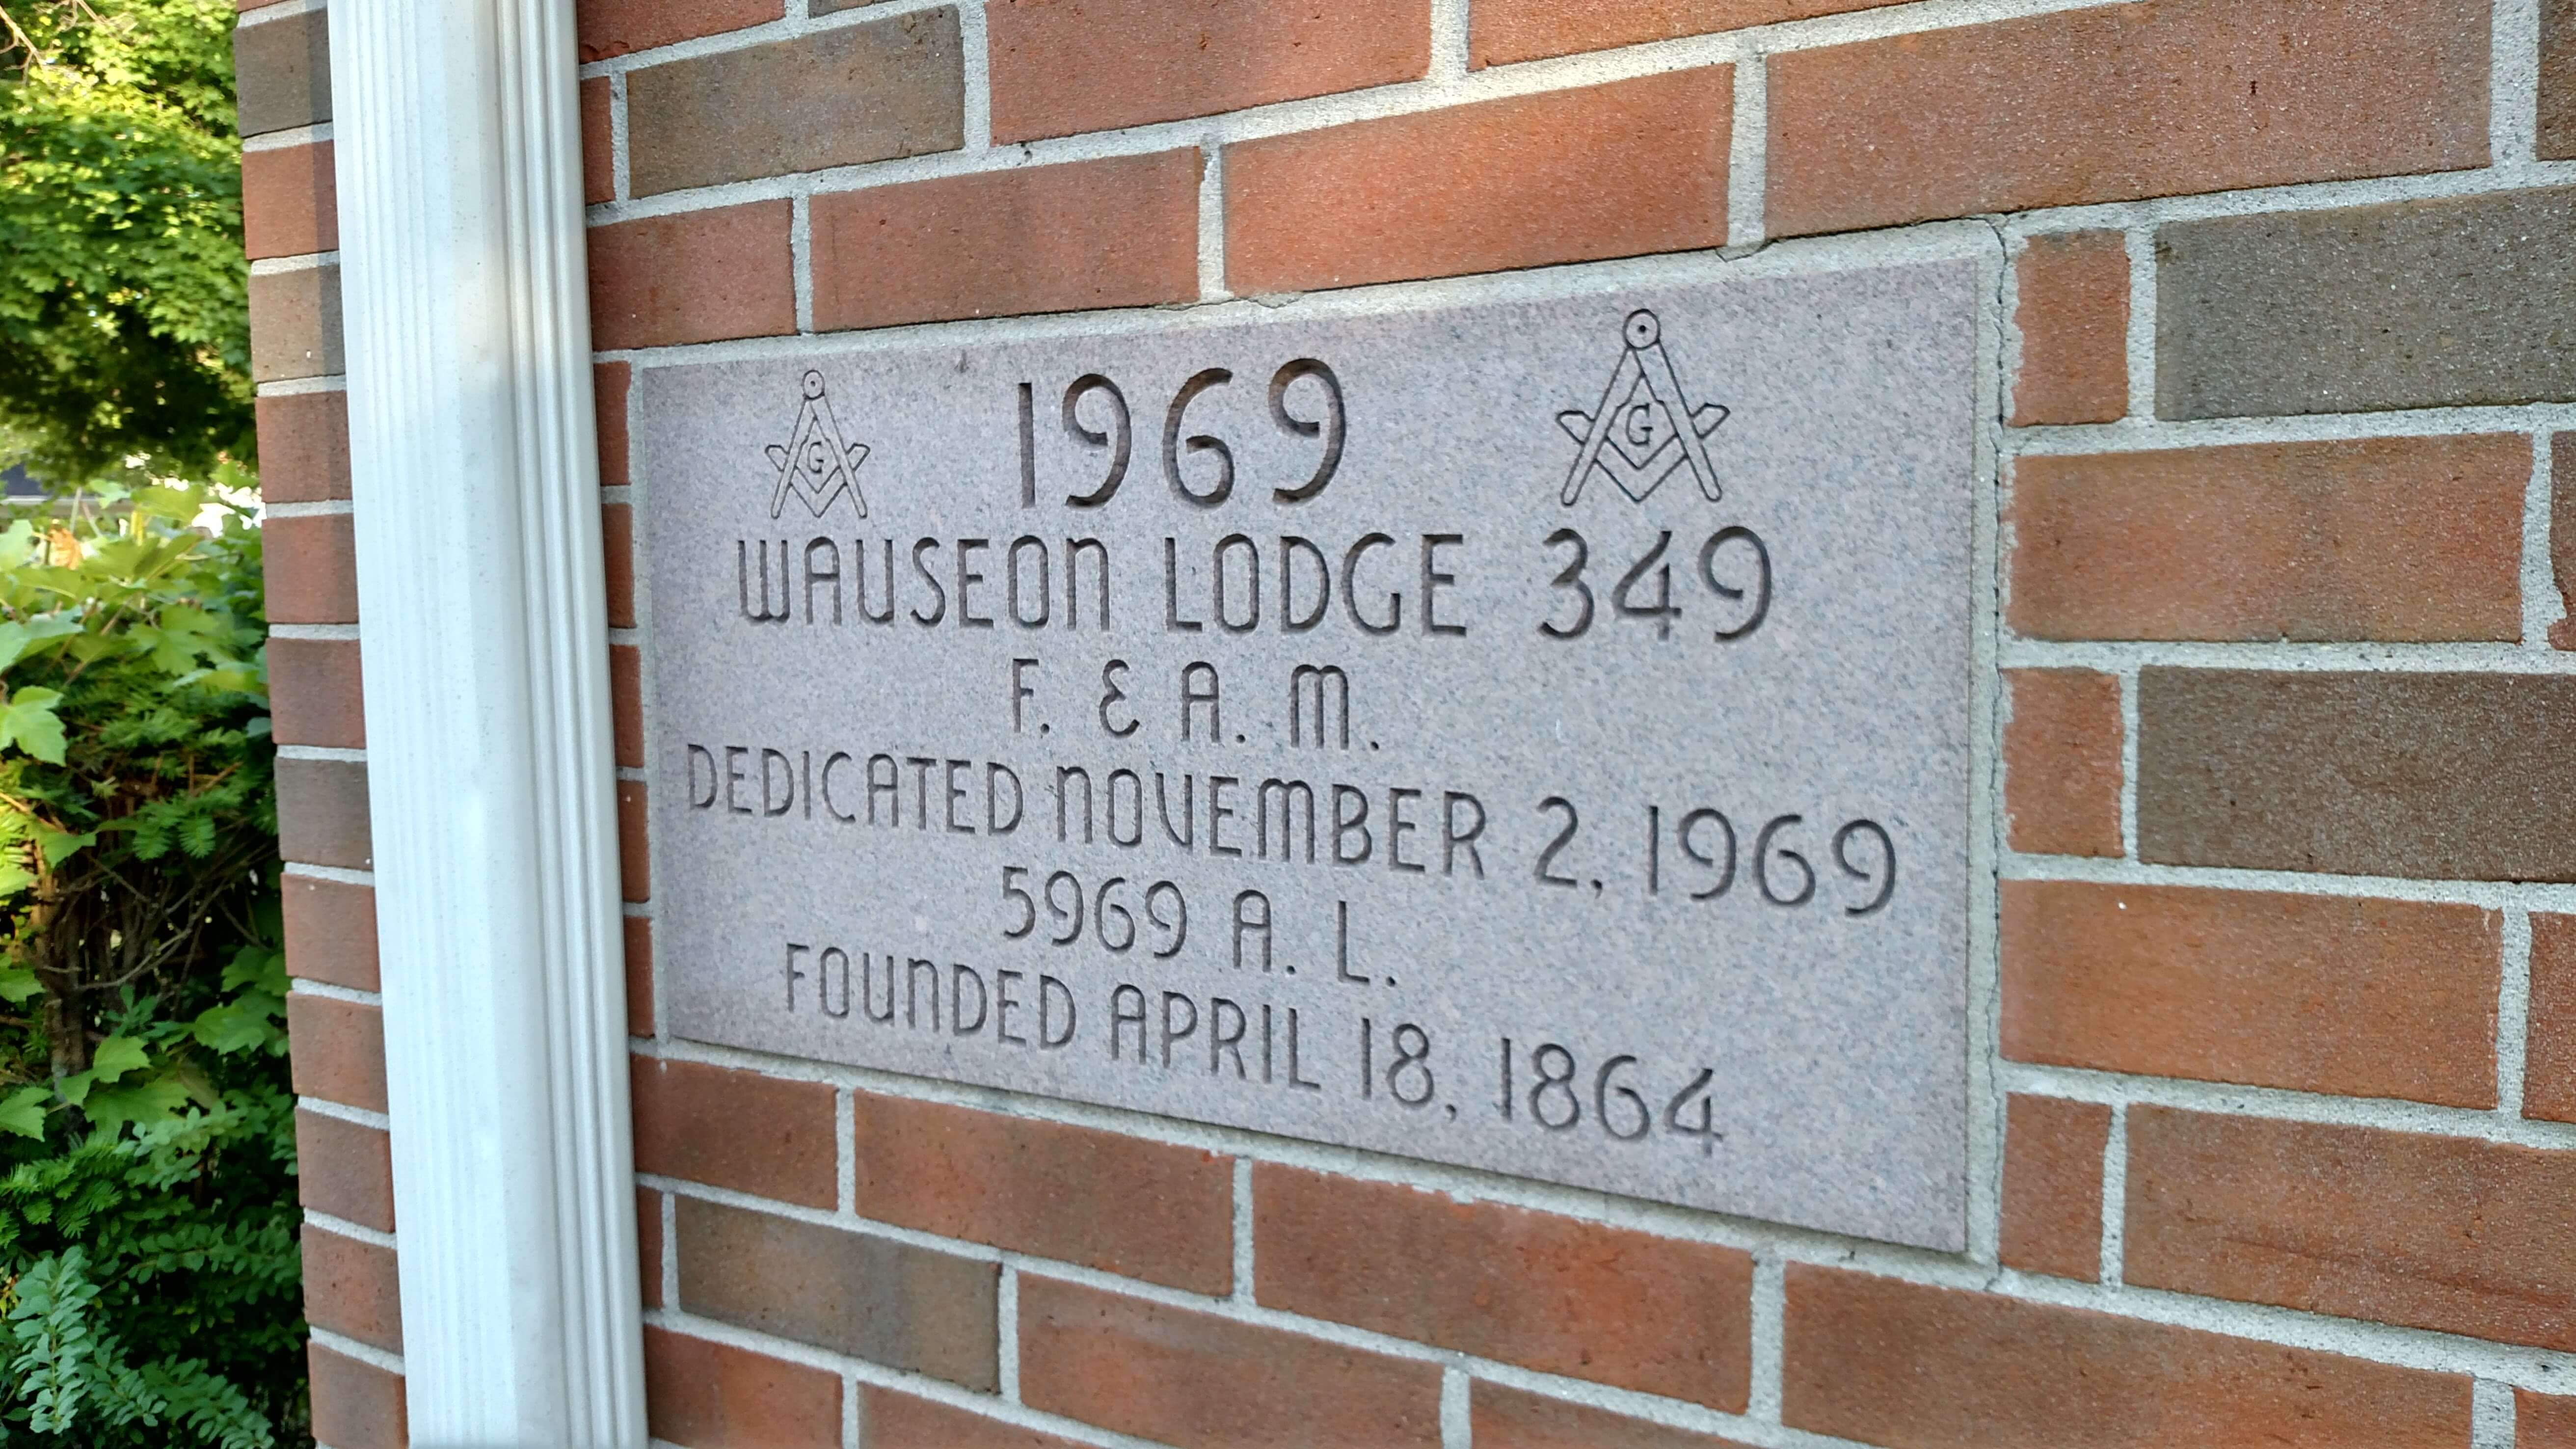 About Wauseon Lodge